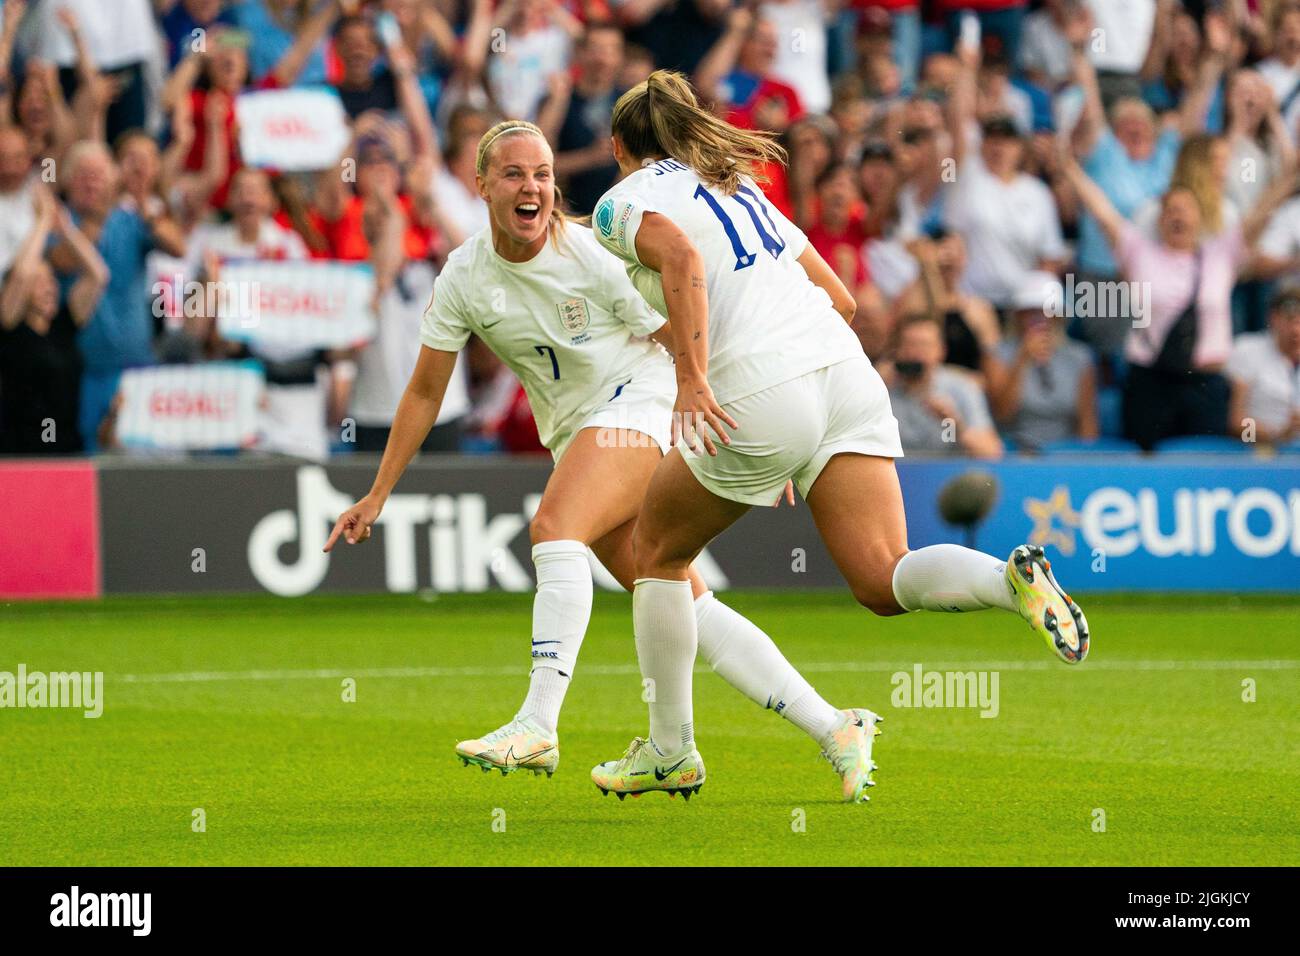 Brighton, UK. 11th July, 2022. Georgia Stanway (10 England) celebrates opening goal (1-0) during the UEFA Womens Euro 2022 football match between England and Norway at the Community Stadium in Brighton, England. (Foto: Sam Mallia/Sports Press Photo/C -  - Alamy) Credit: SPP Sport Press Photo. /Alamy Live News Stock Photo